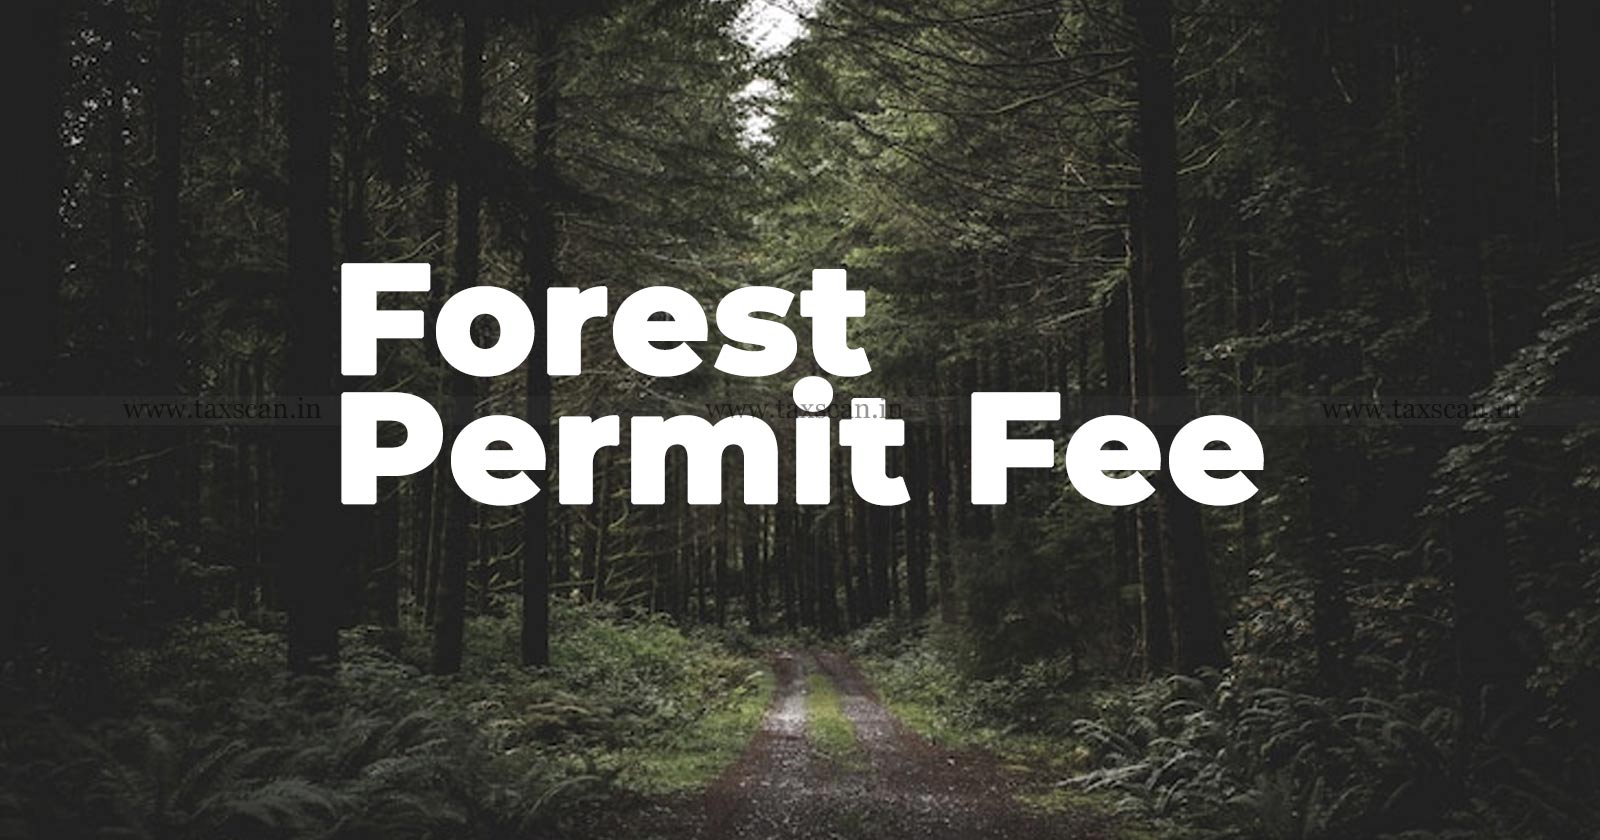 Forest Permit Fee - GST - AAR - Authority for Advance Ruling - taxscan